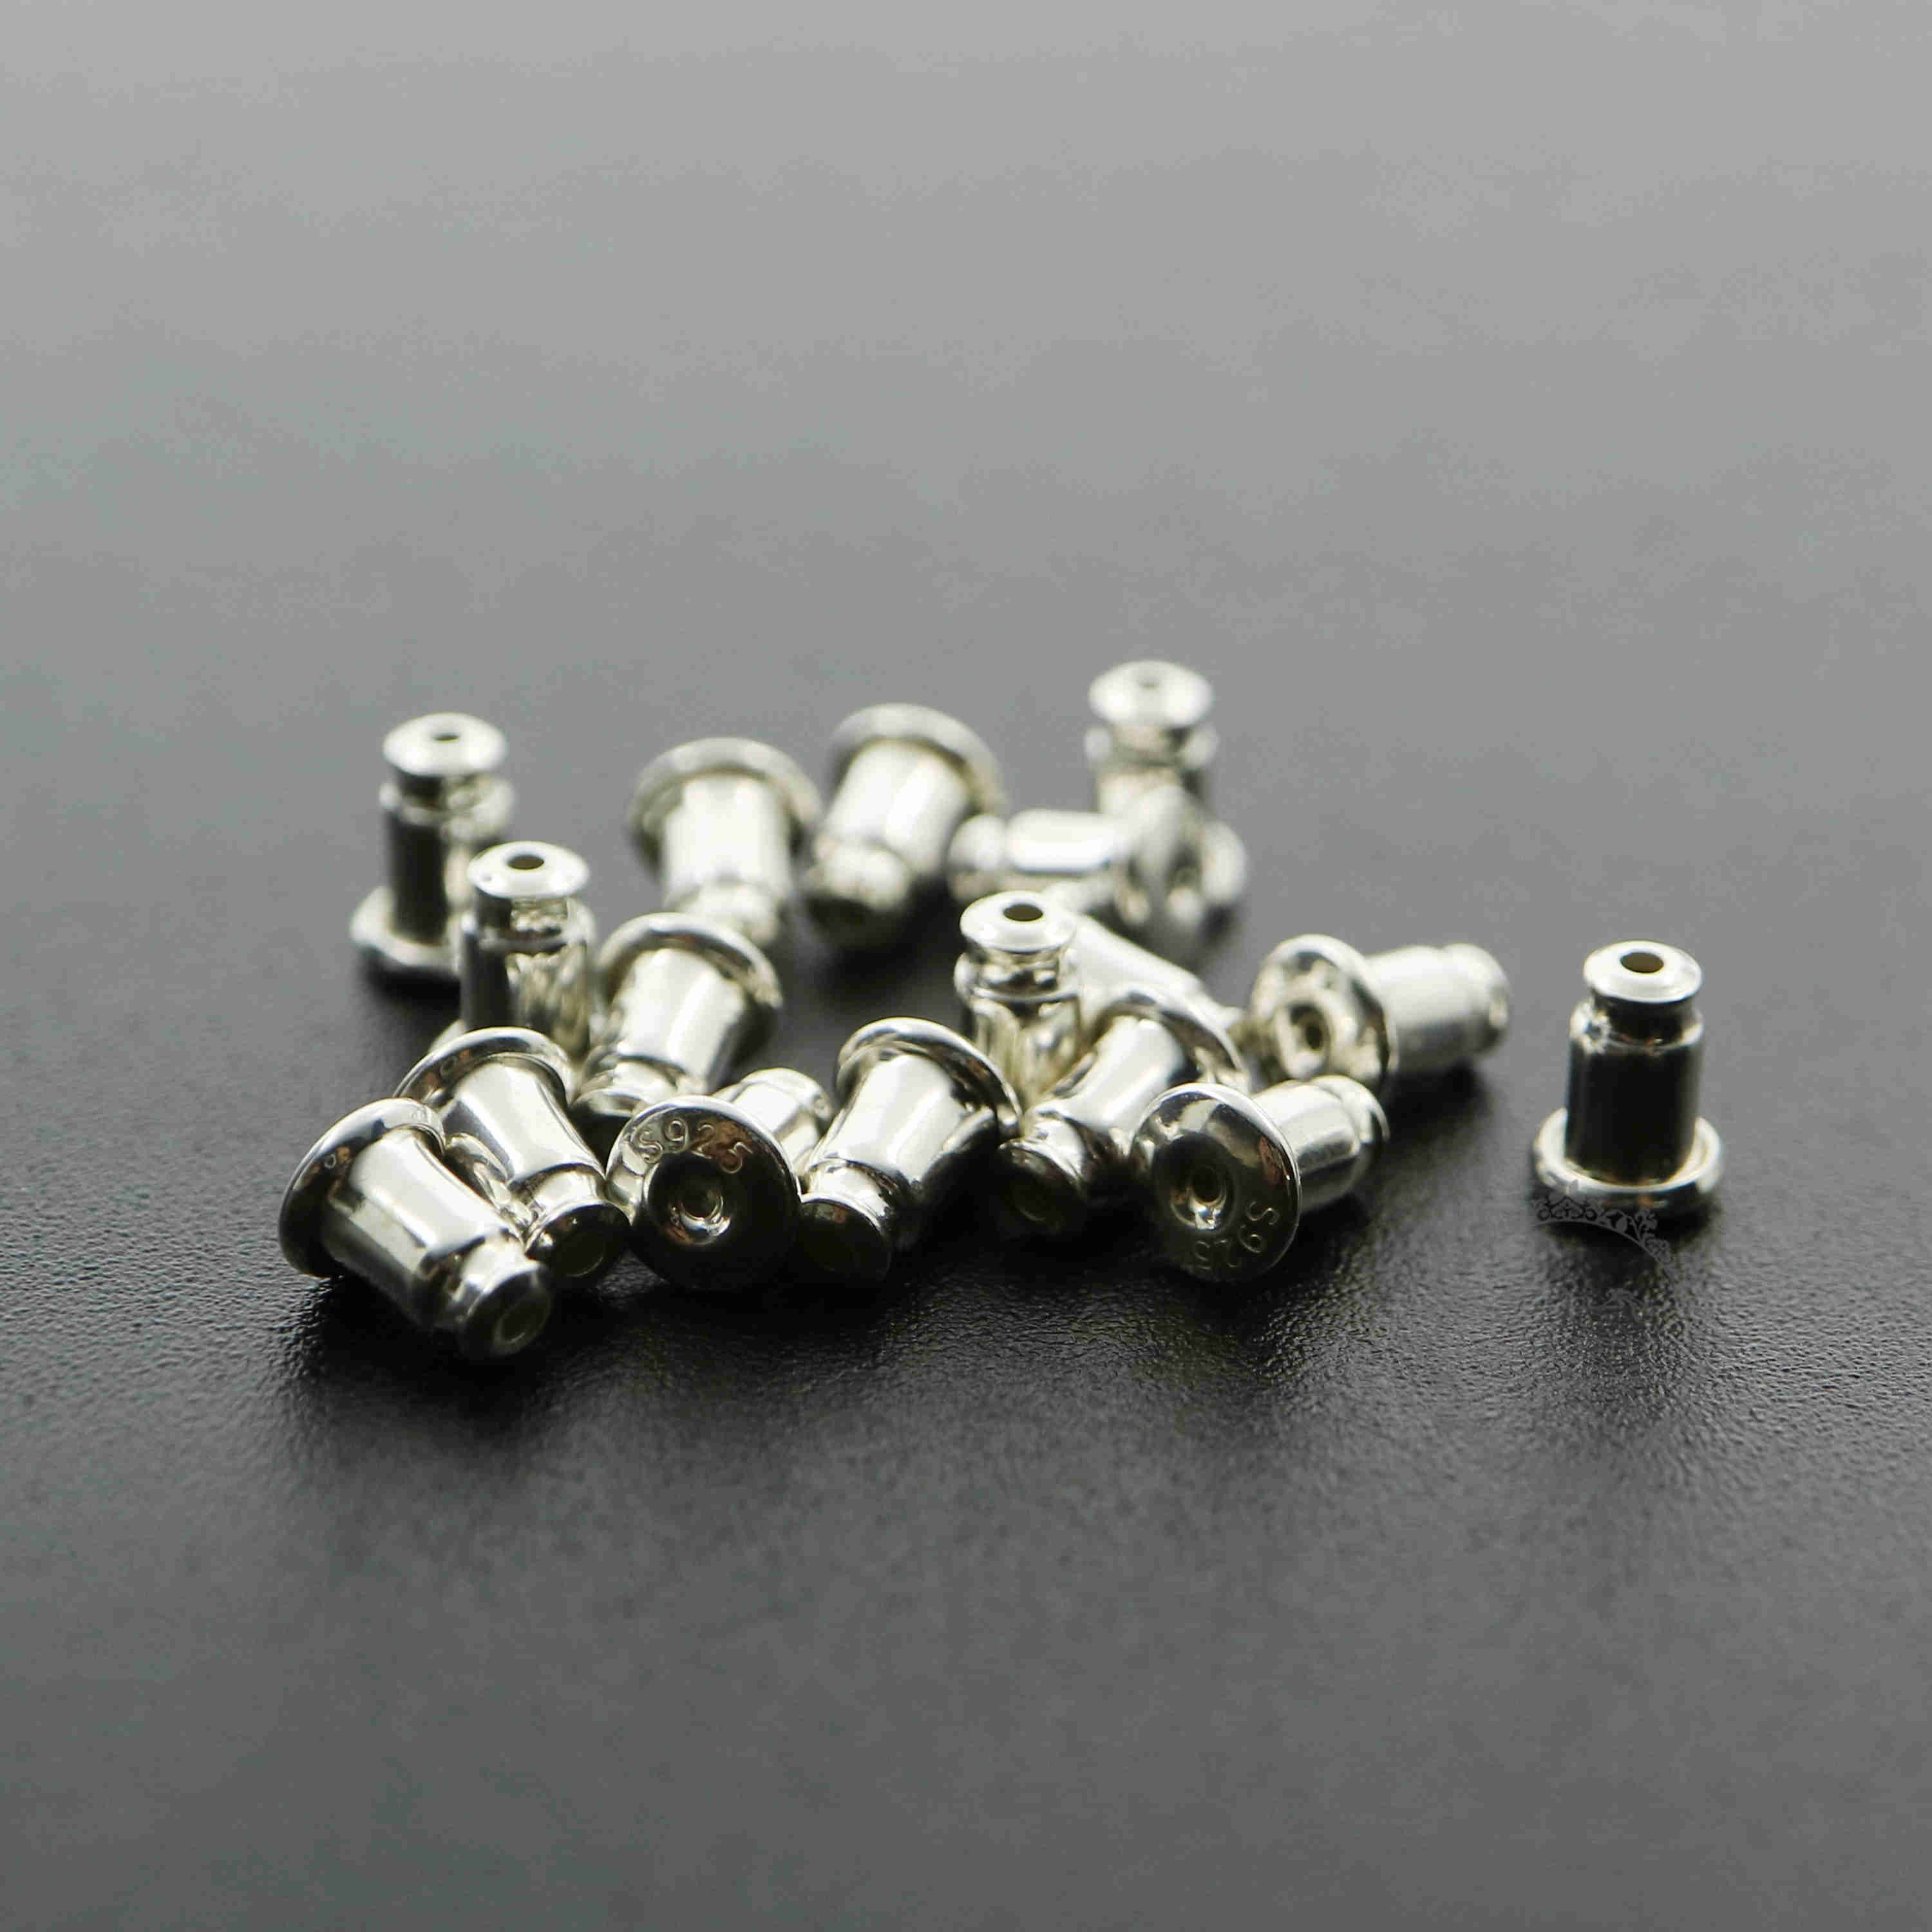 10pcs 4.5x6mm 925 sterling silver DIY studs earrings back supplies findings 1702168 - Click Image to Close